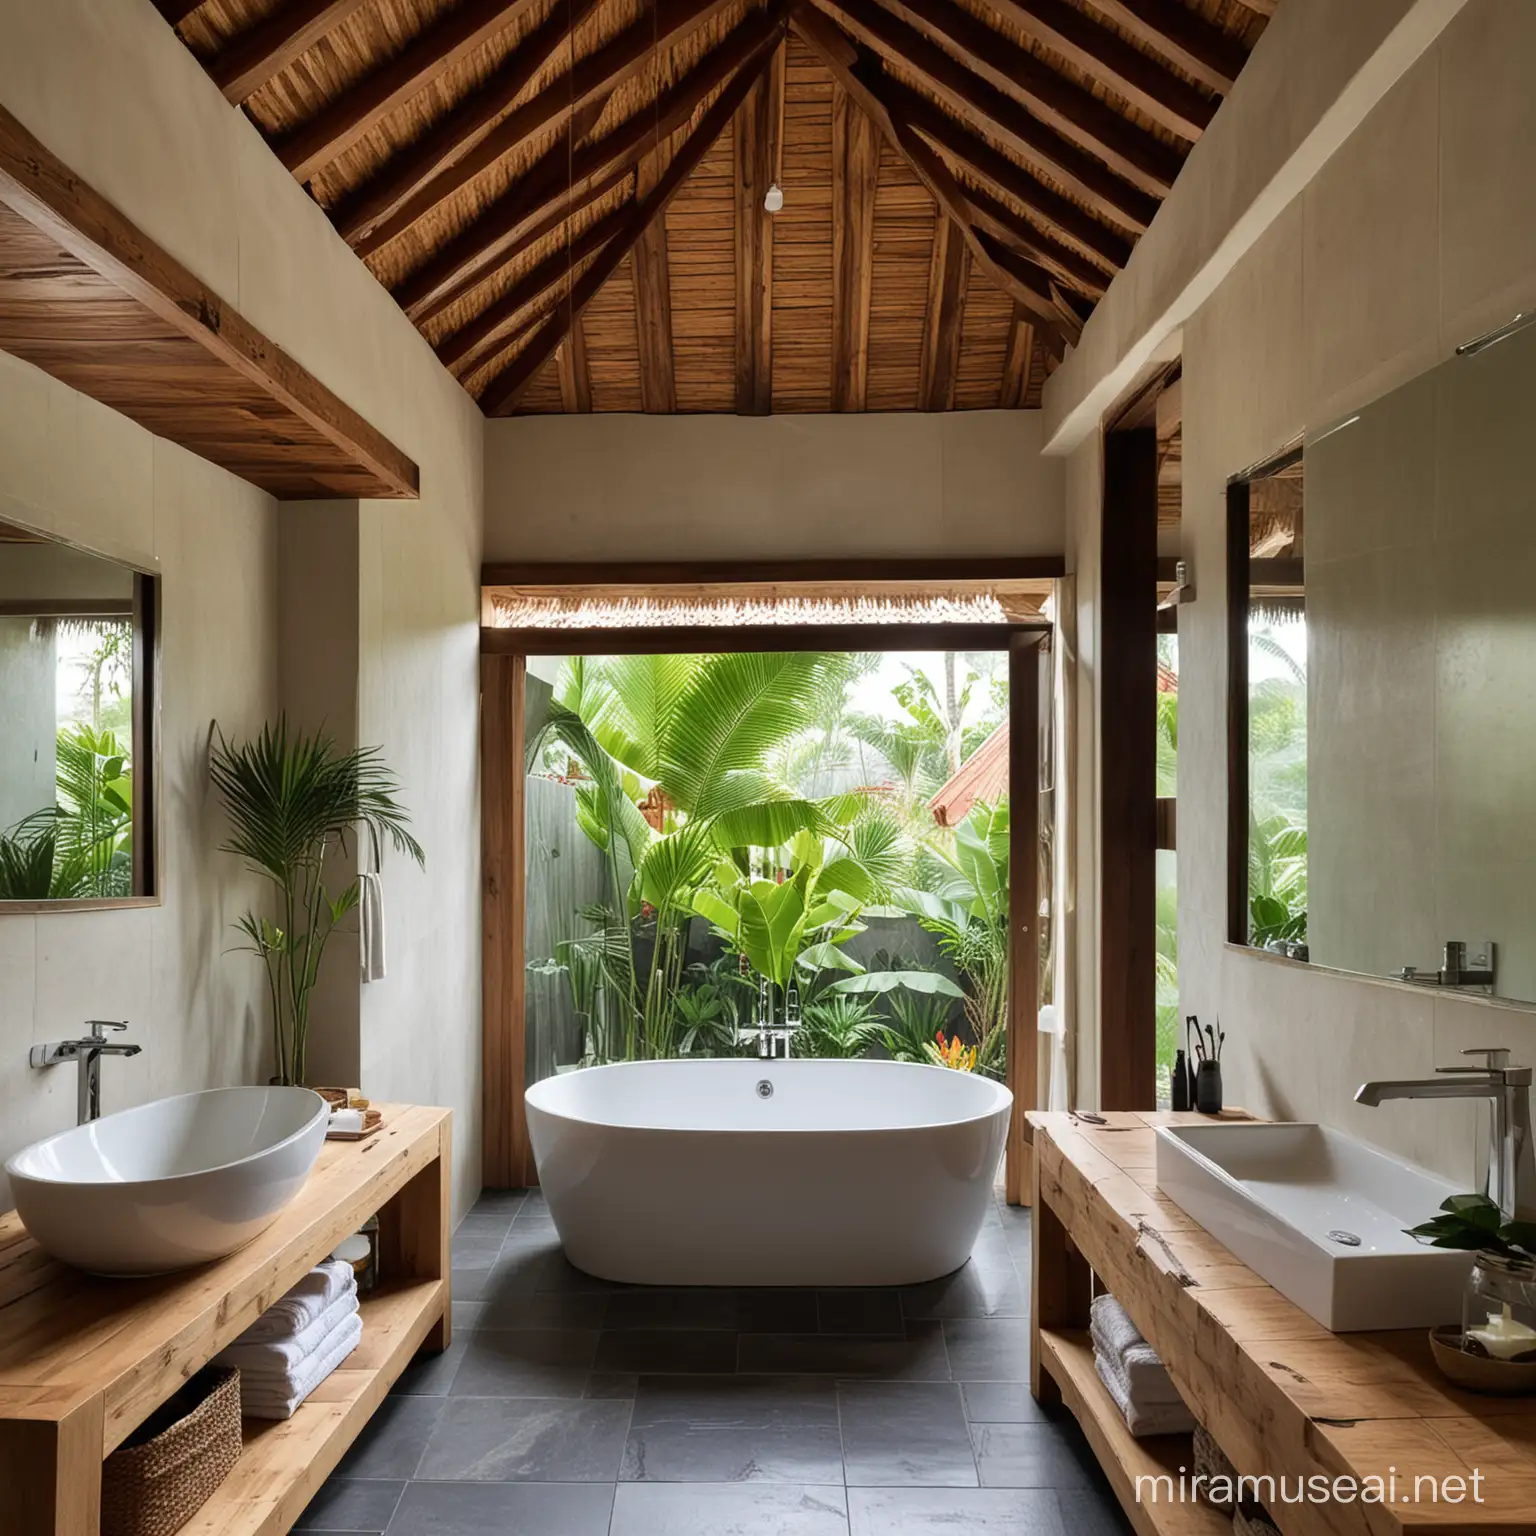 Bali Bathroom with Wooden Roof and Tile Floor